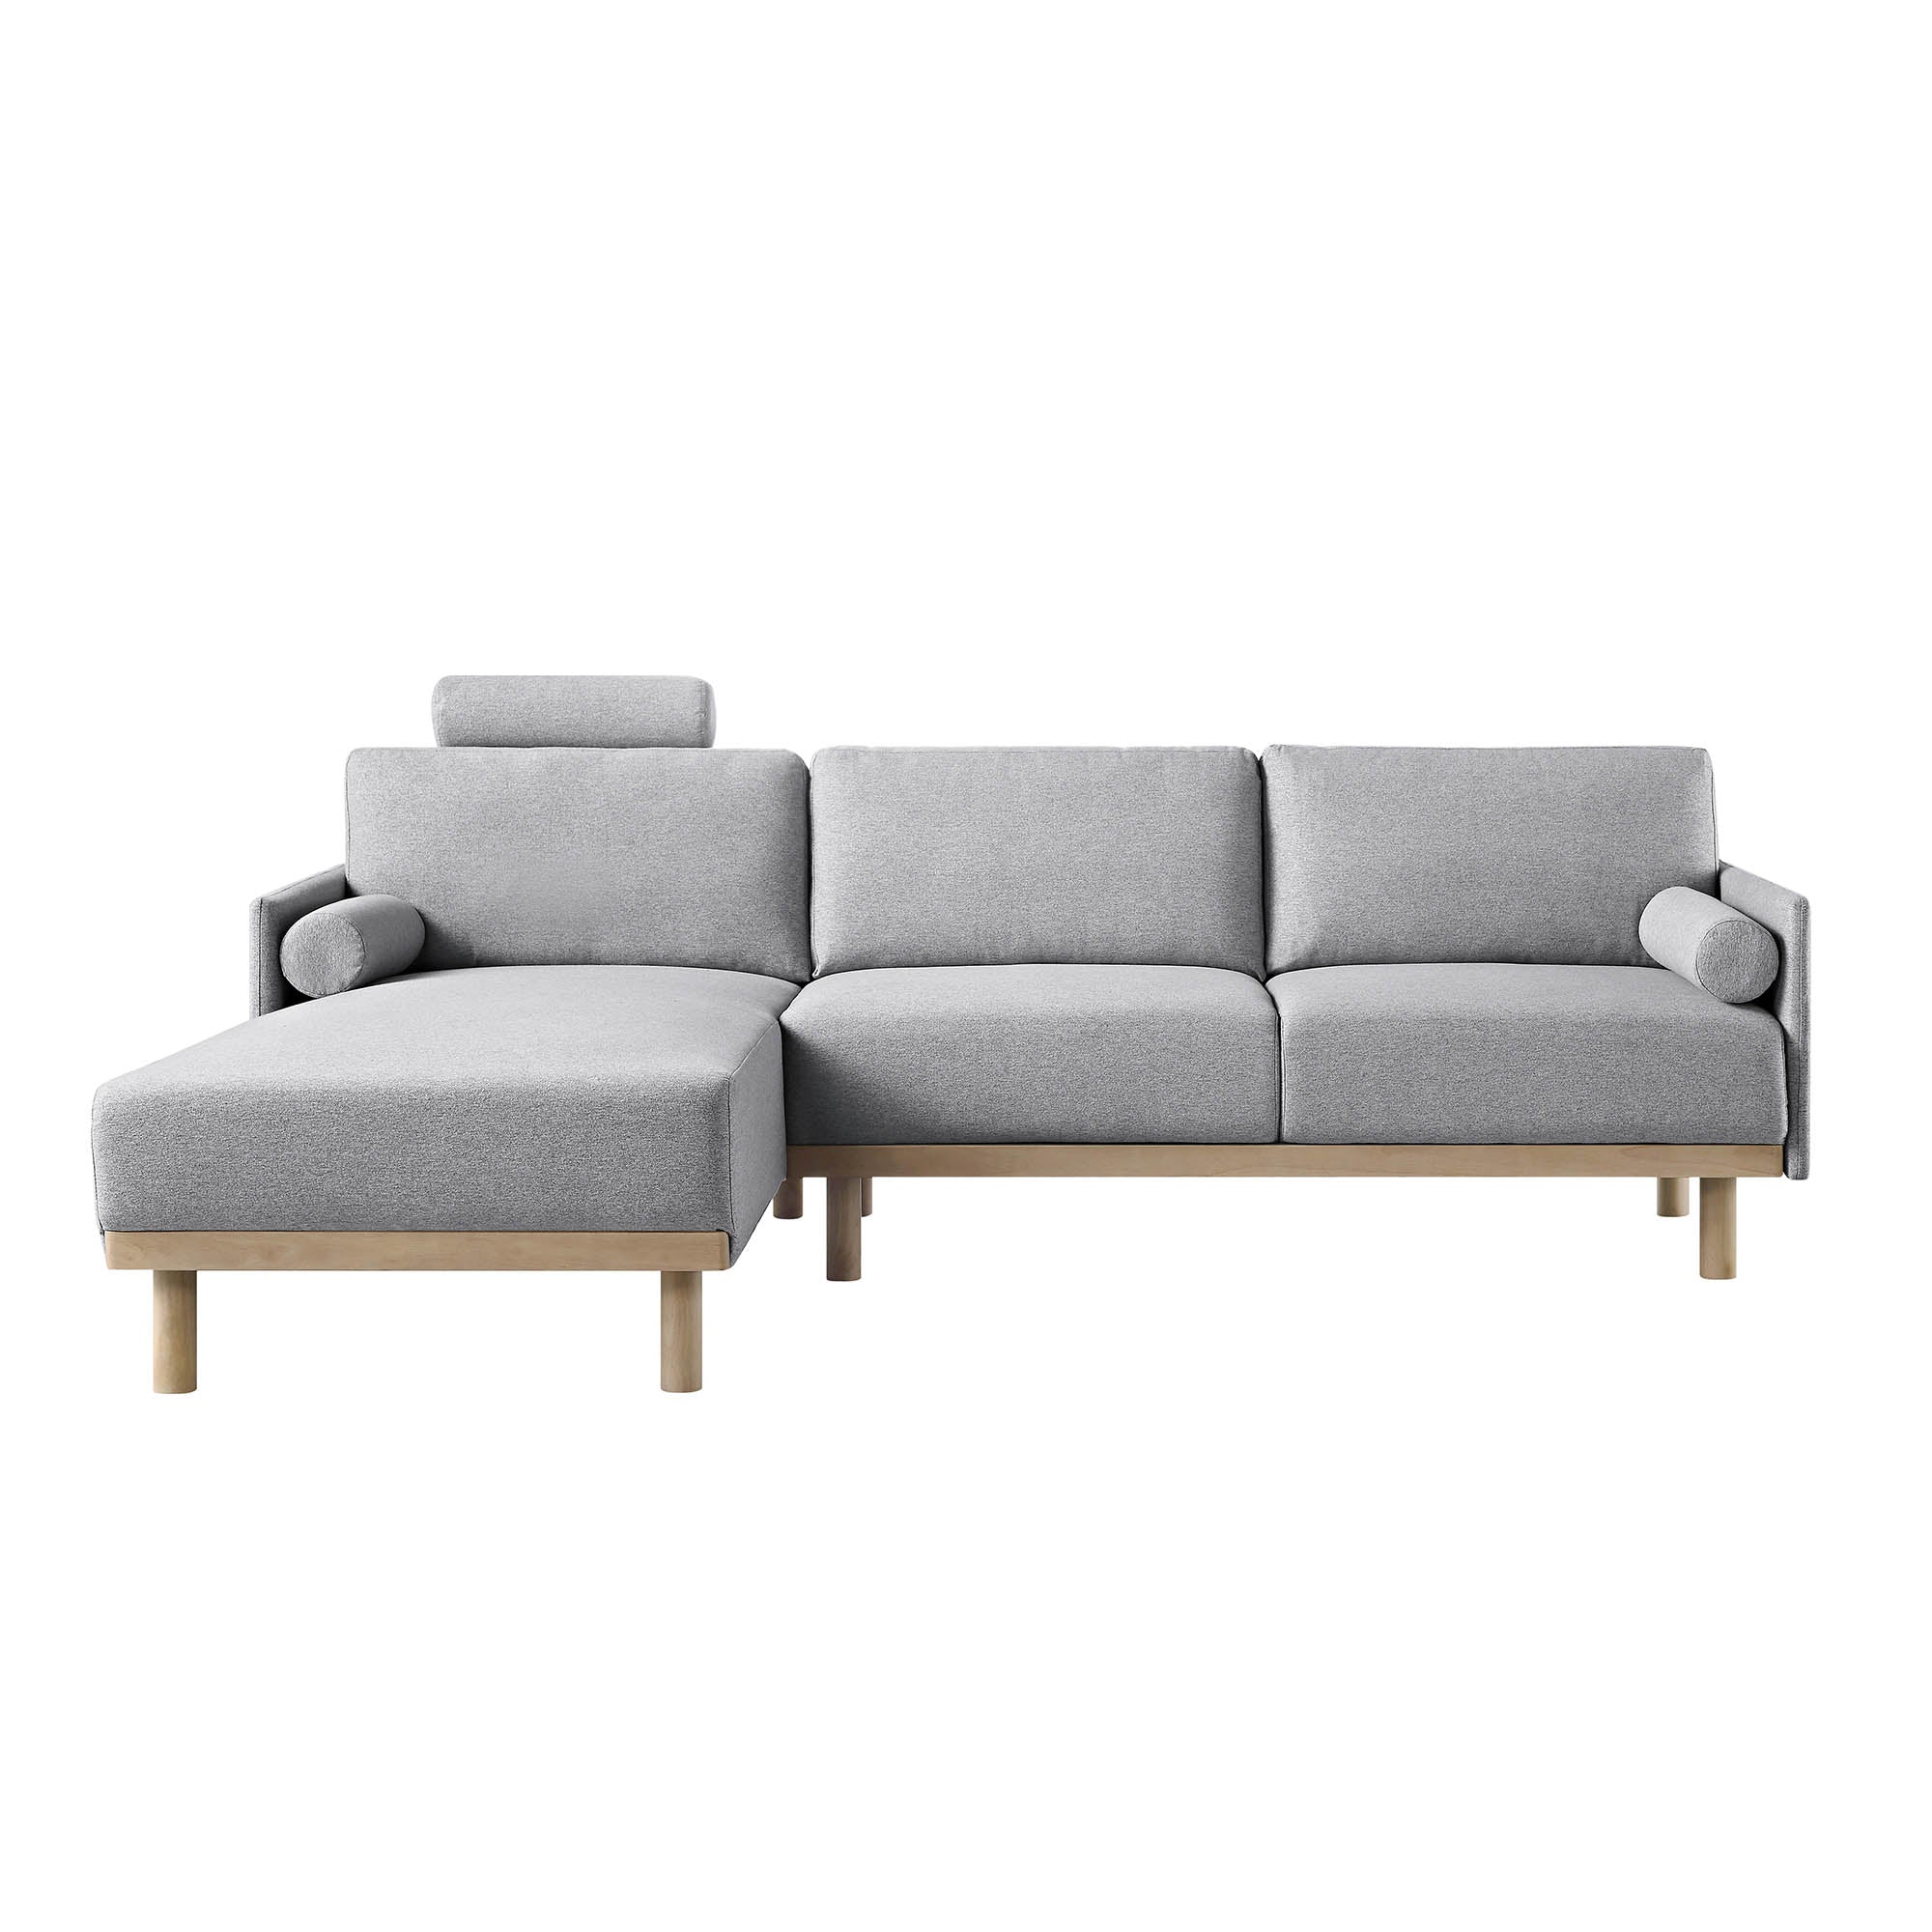 Timber Grey Marl Fabric Sofa, Large 3-Seater Chaise Sofa Left Hand